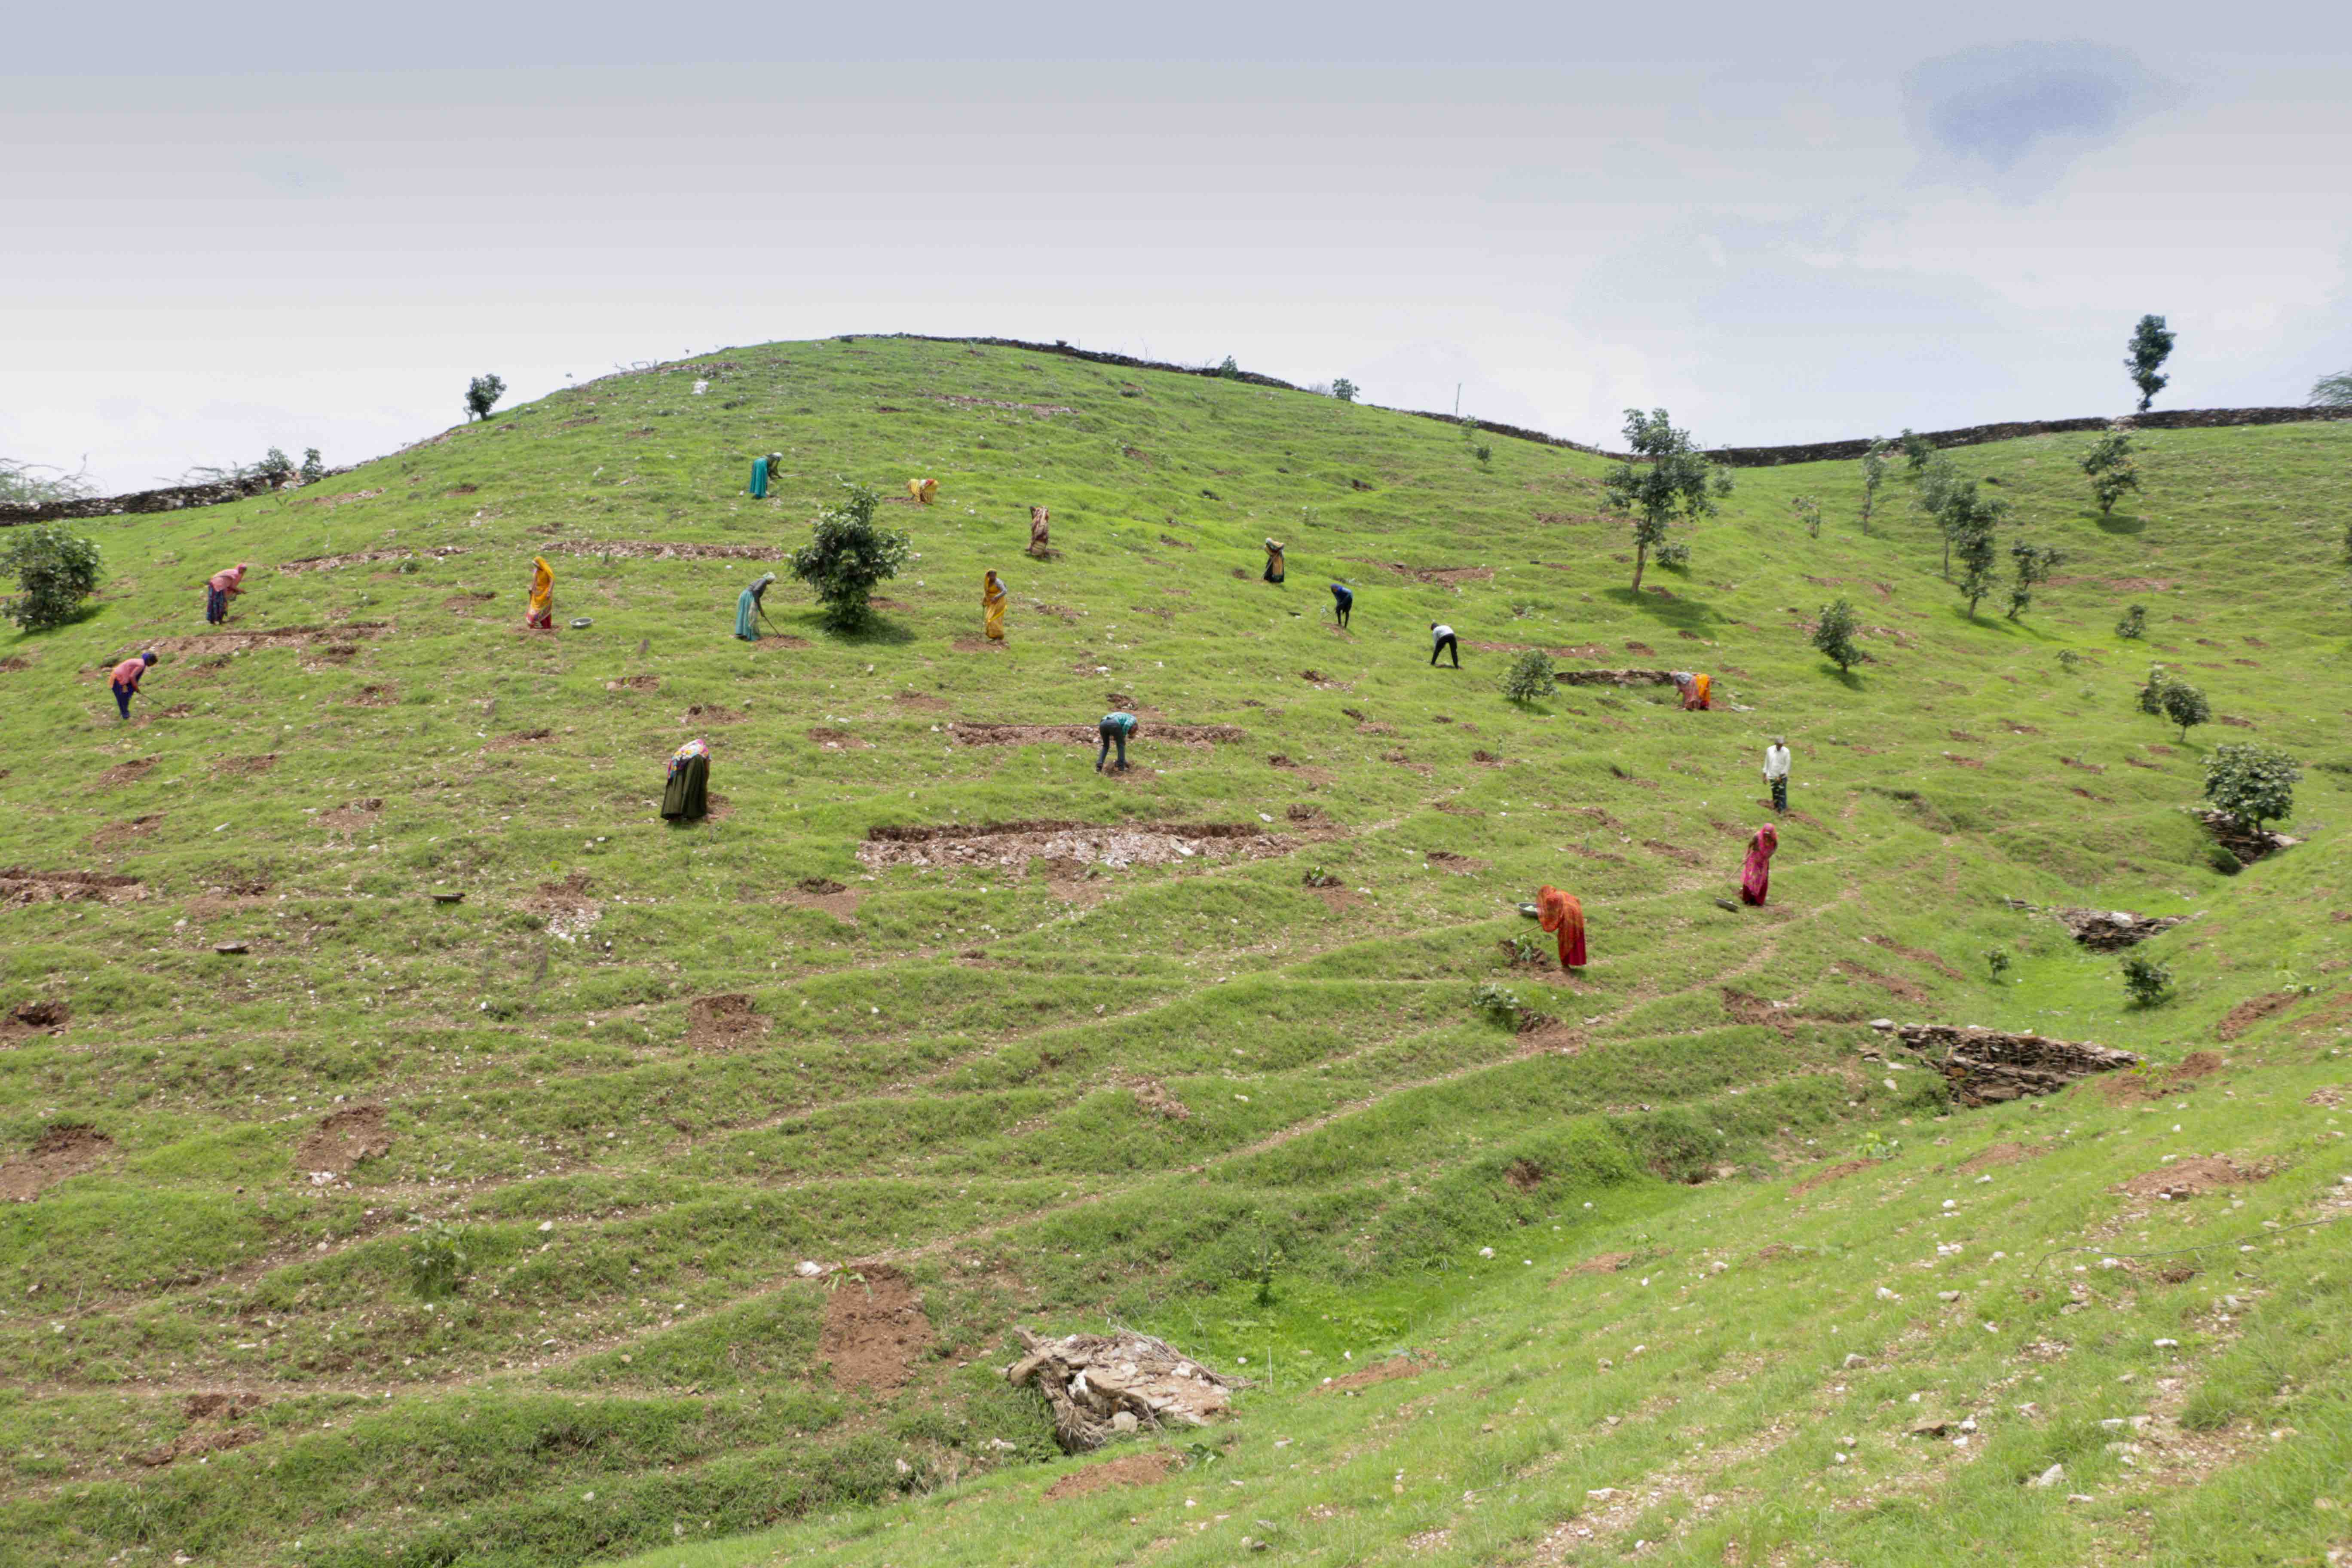 A community come together to rejuvenate their common land.